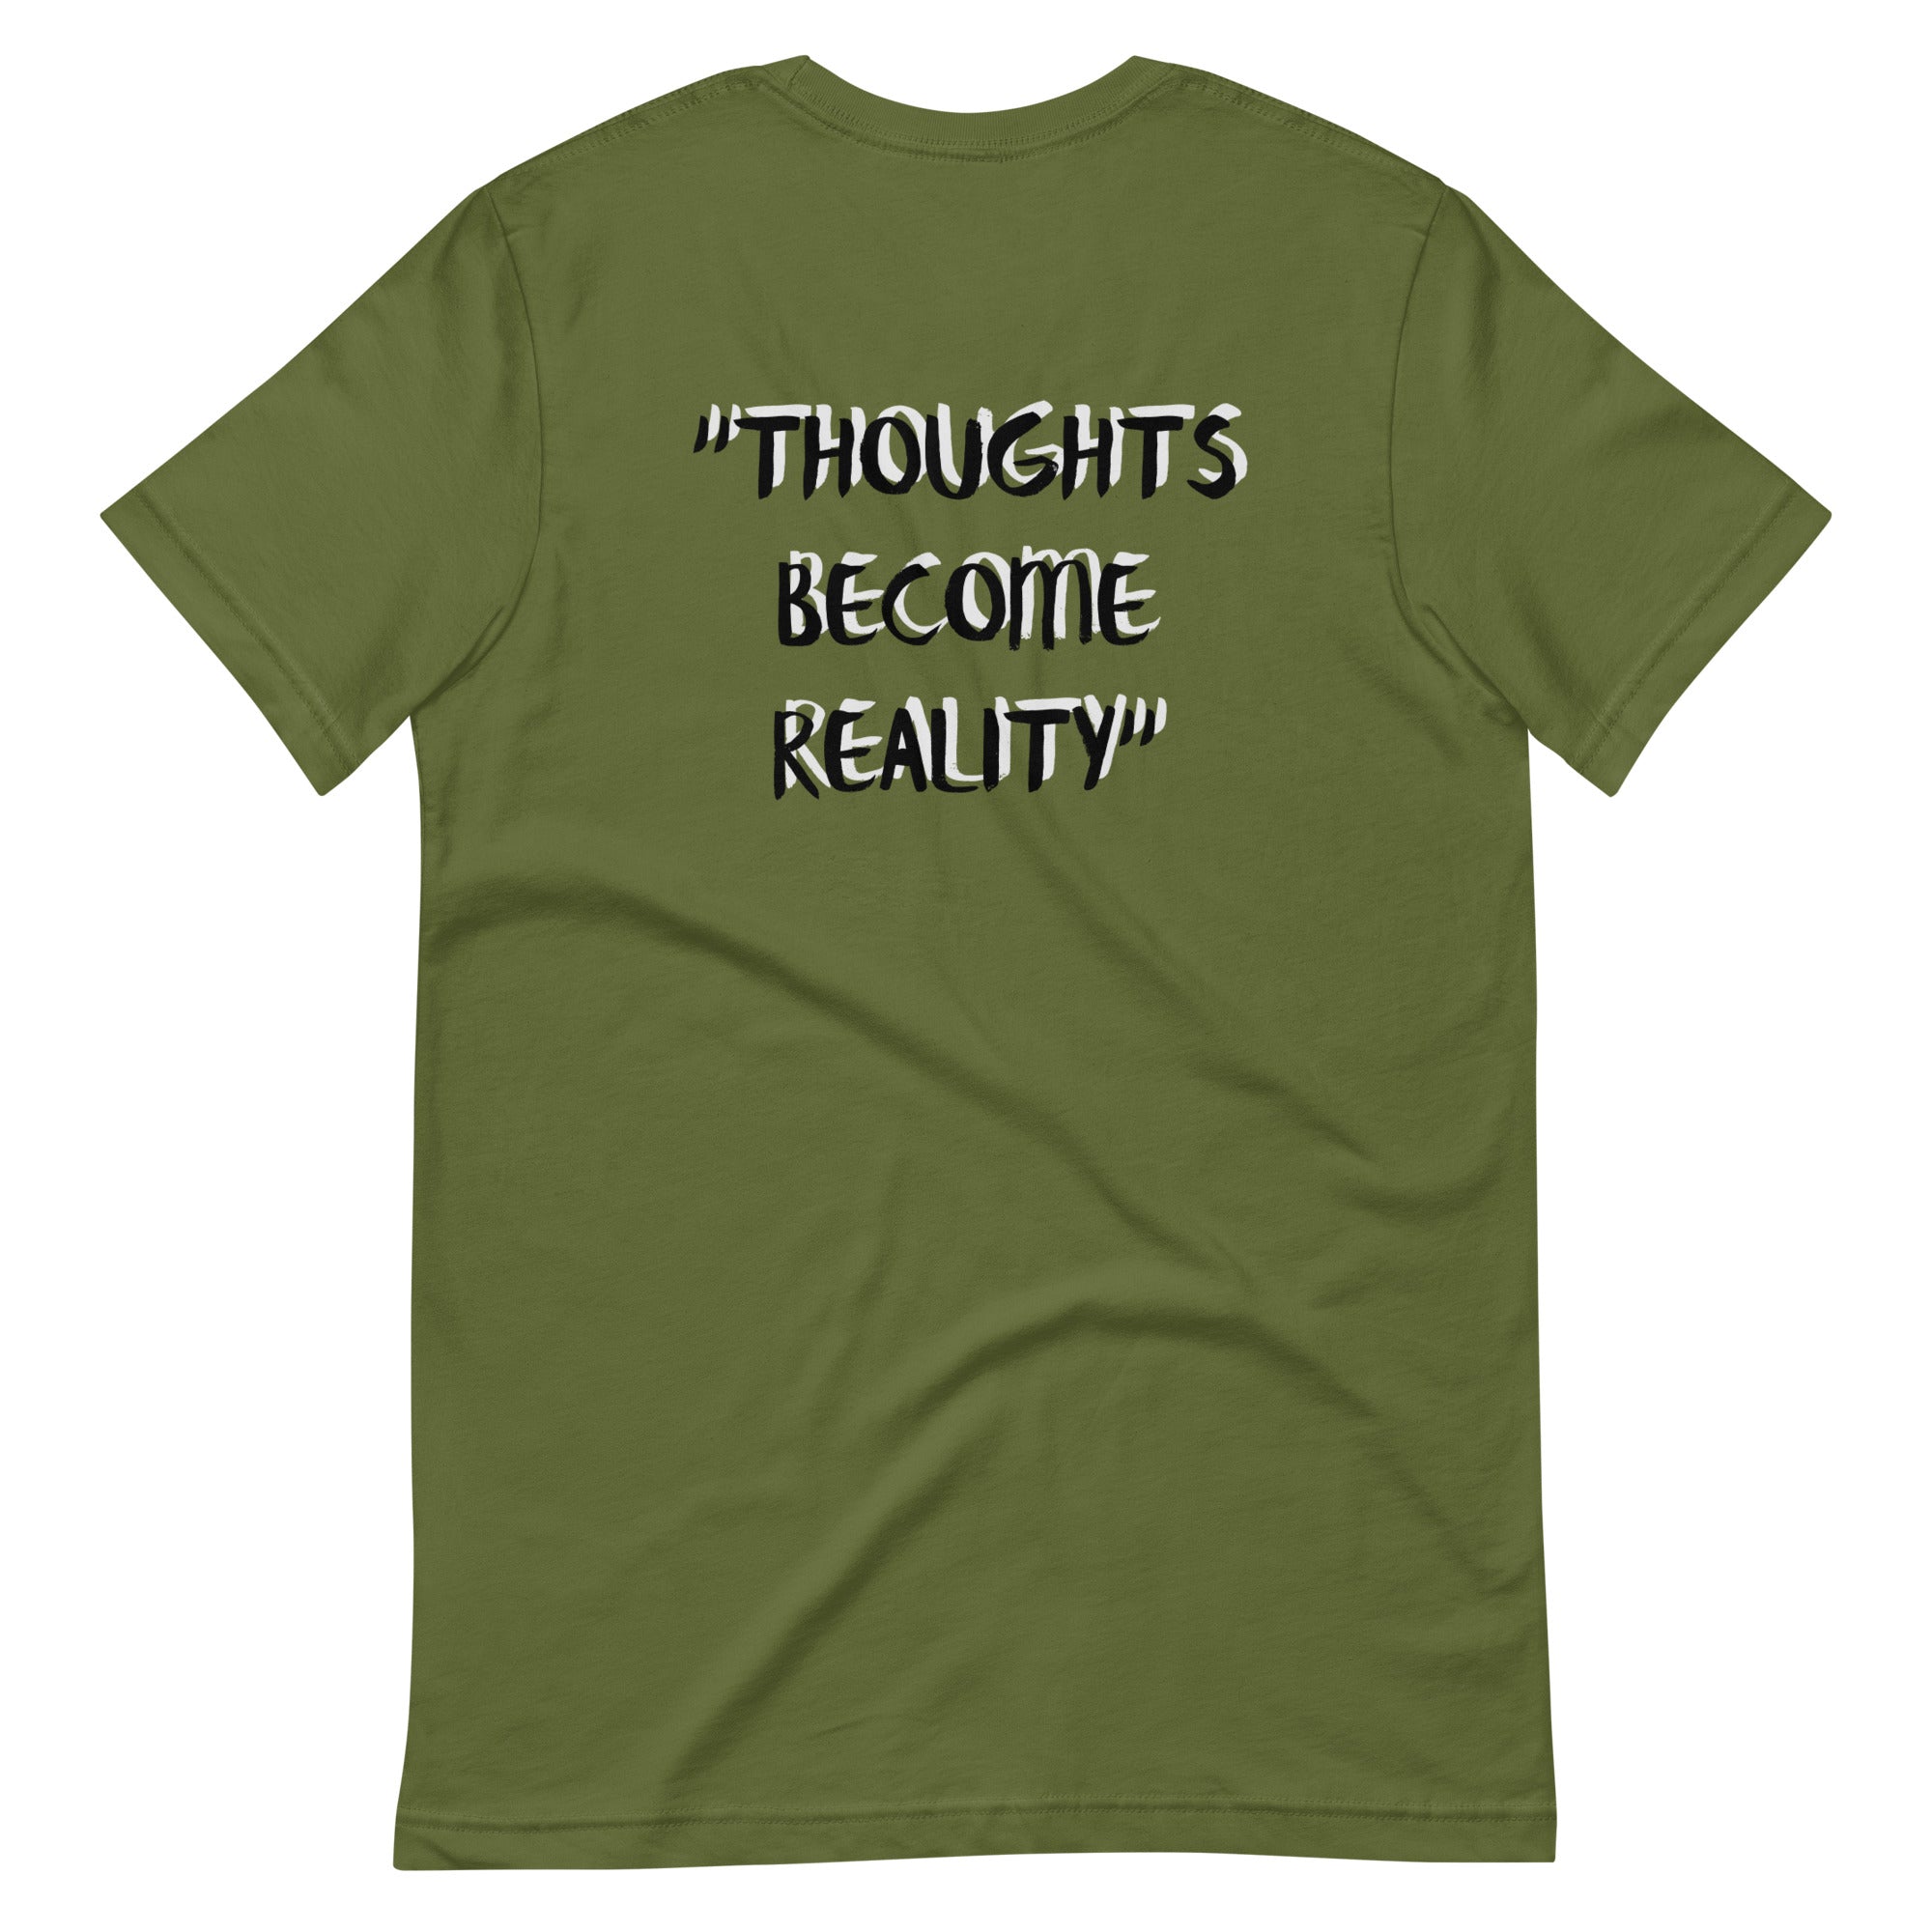 Unisex t-shirt "Thoughts become reality"